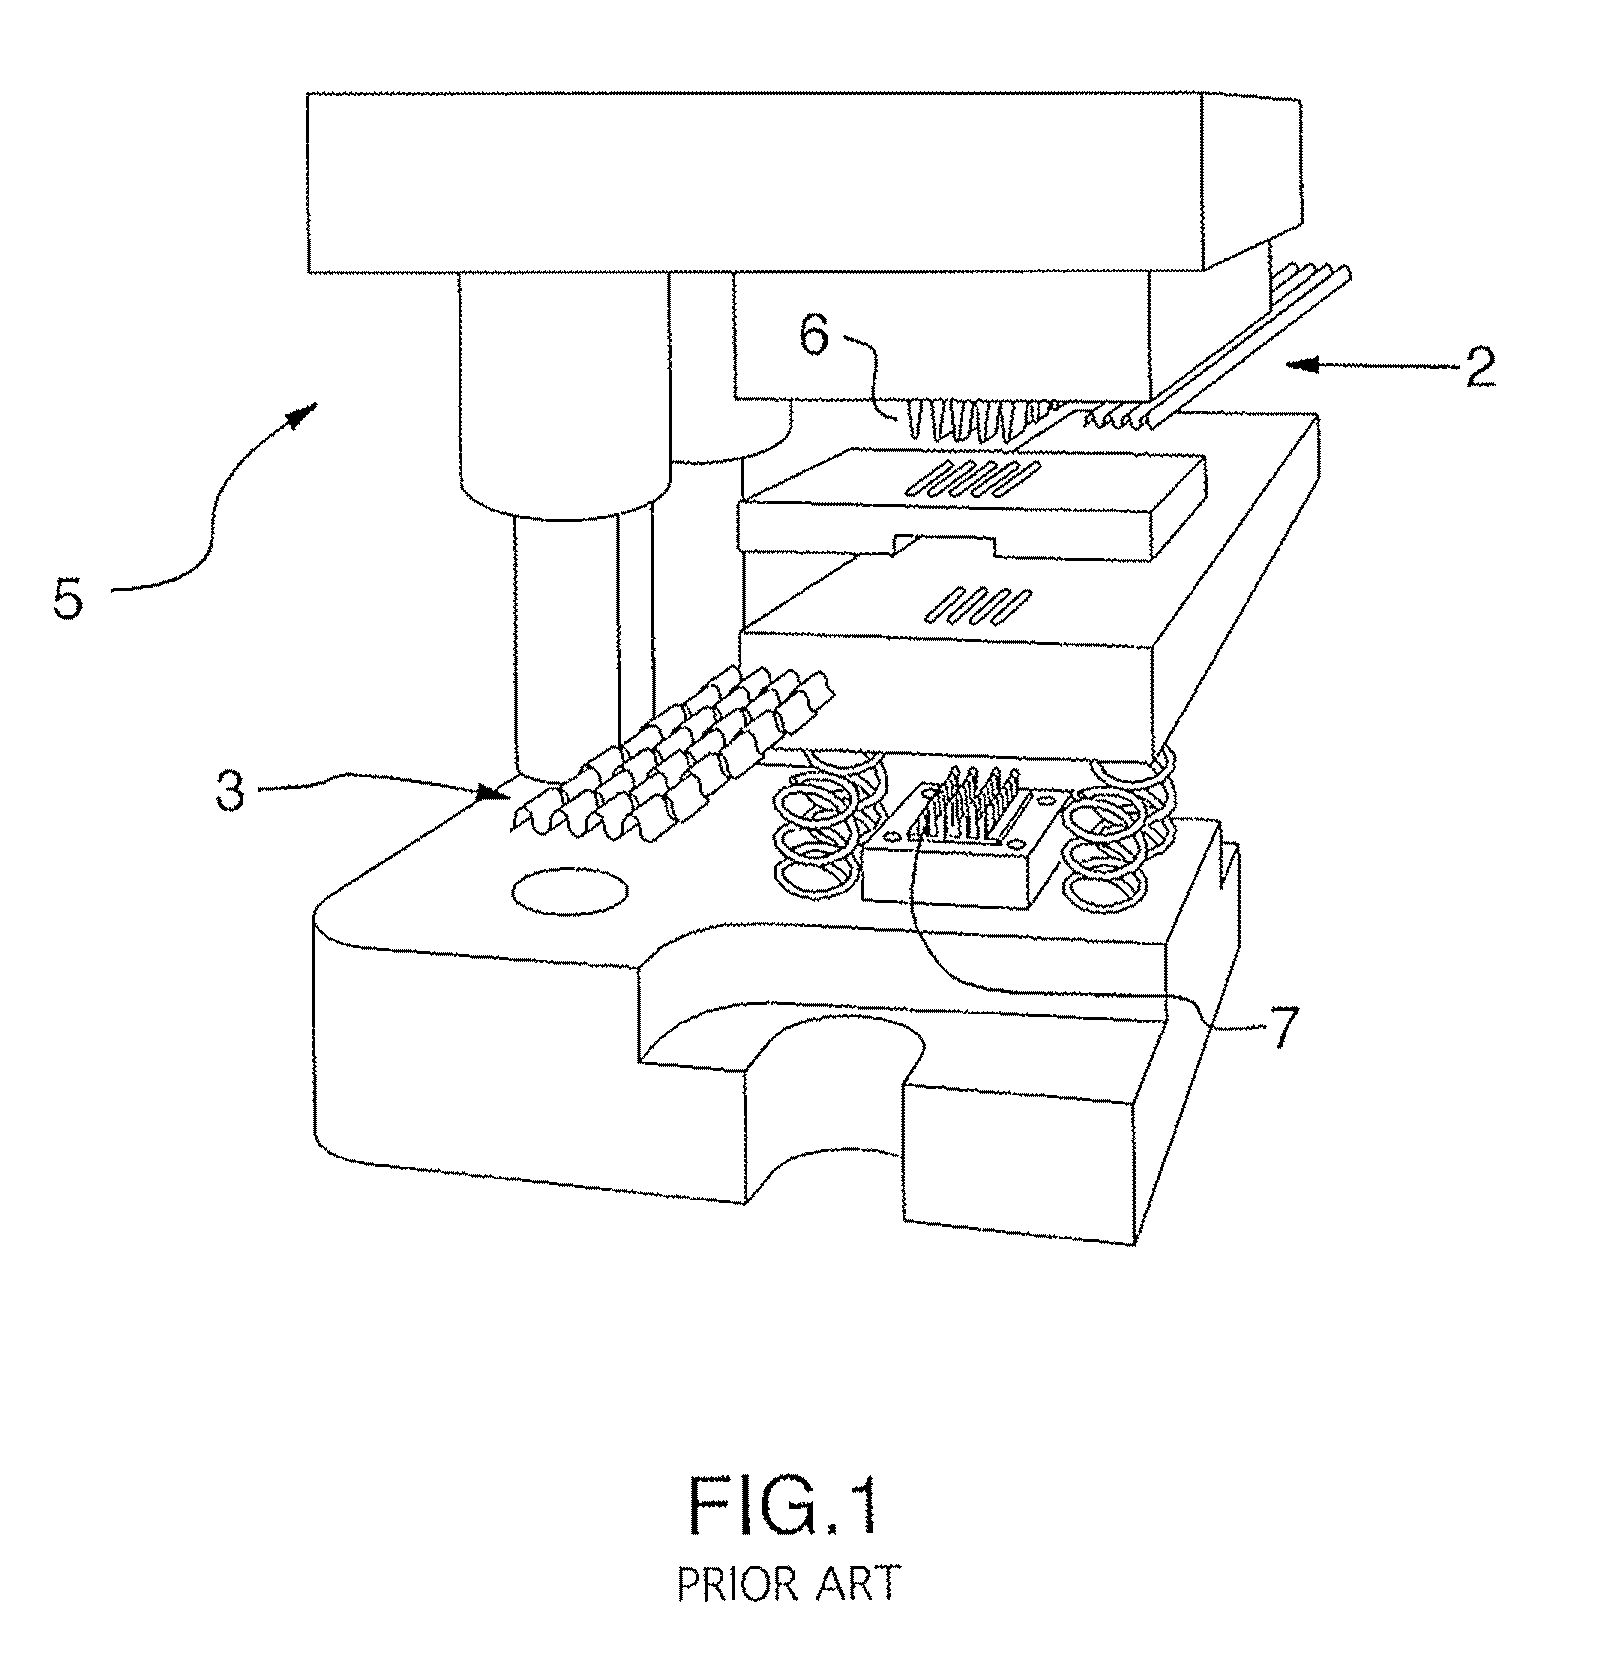 Turbulizers and method for forming same